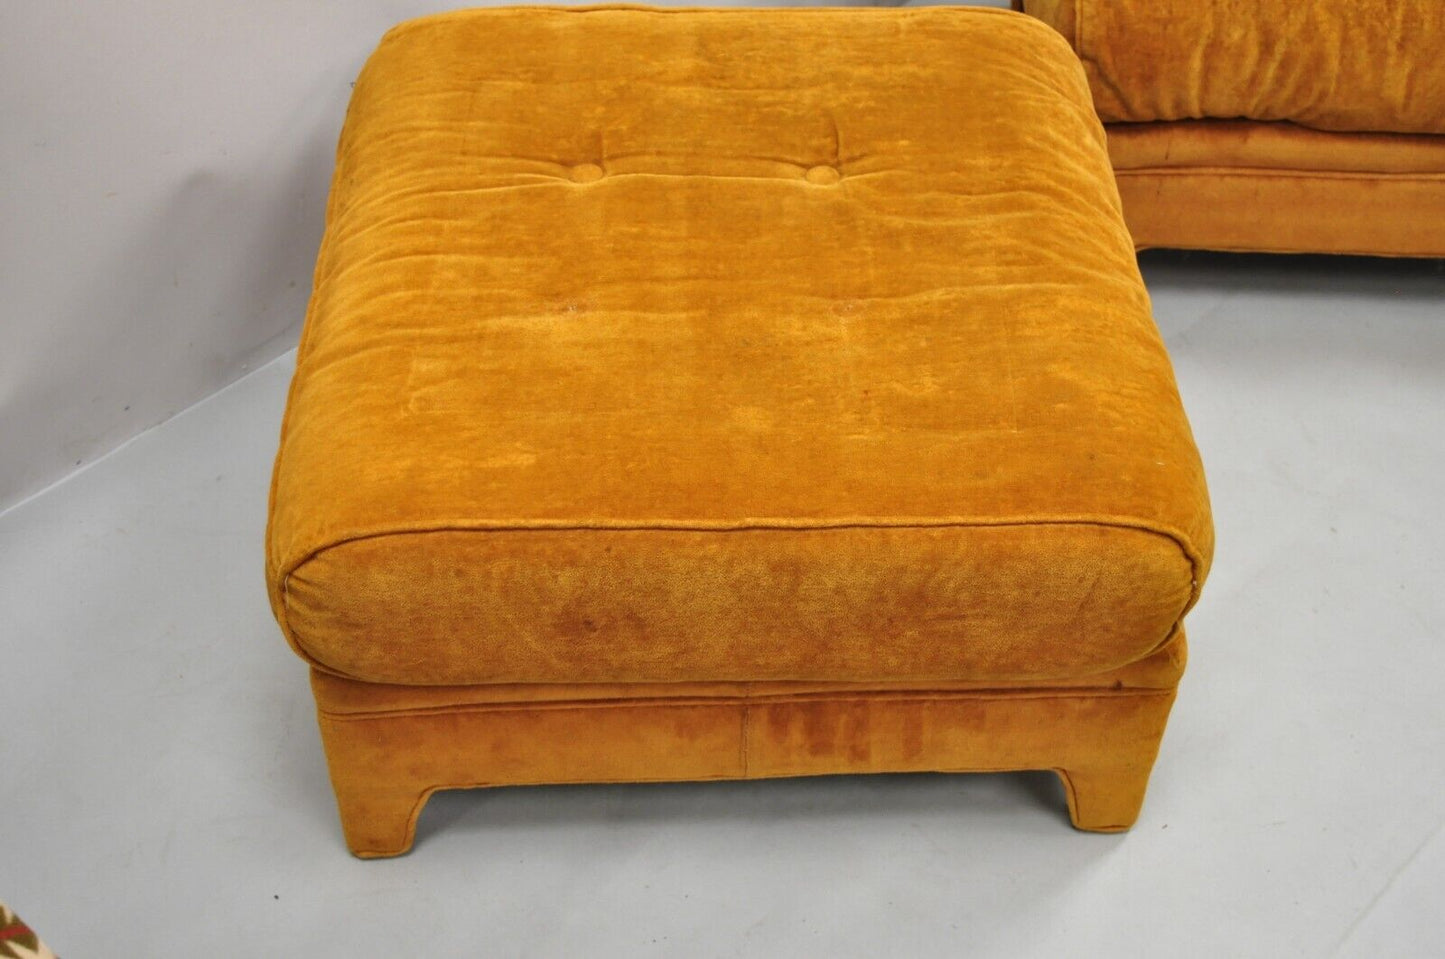 Mid Century Modern Orange Oversized Upholstered Ottomans by Pembrook - A Pair